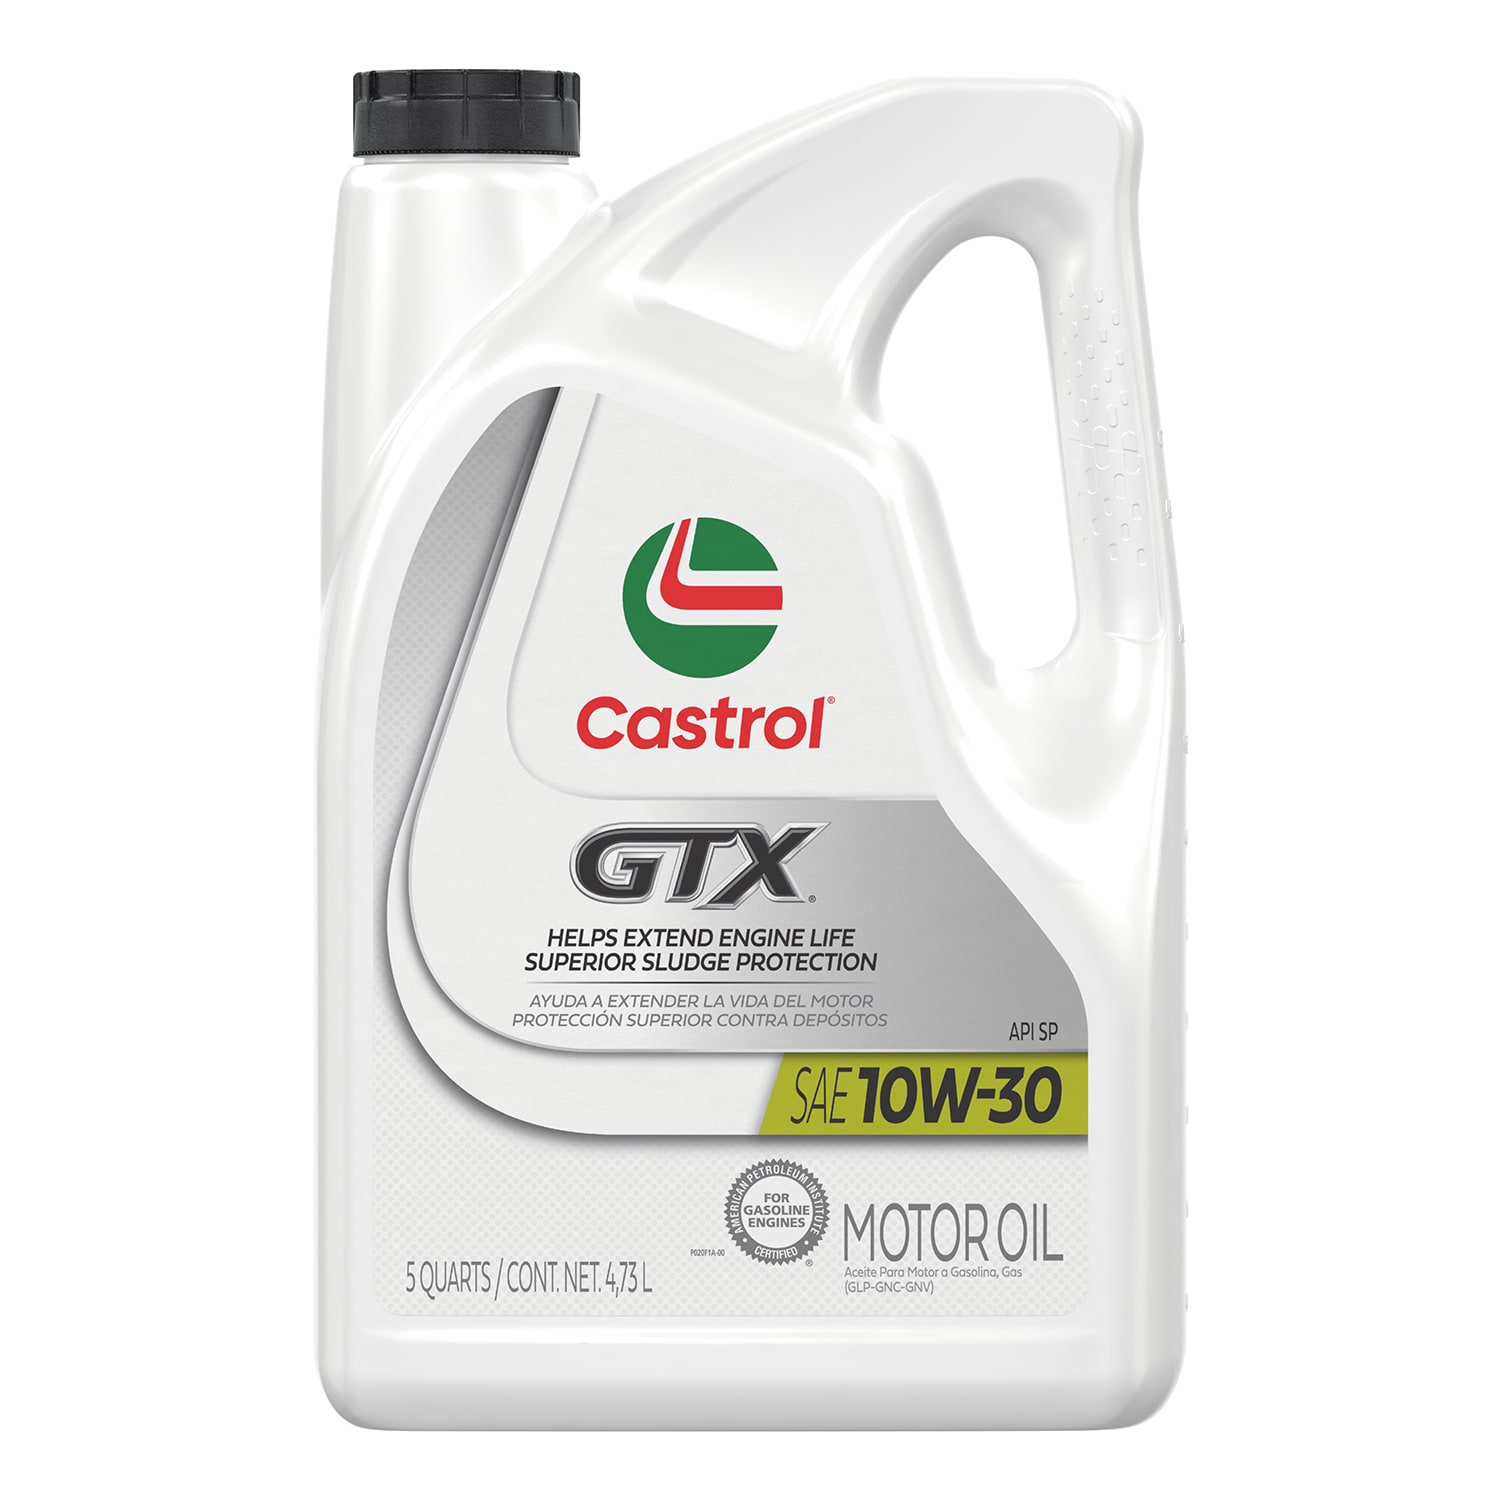 CASTROL Gtx 10w-30 5 Qt in the Motor Oil u0026 Additives department at Lowes.com